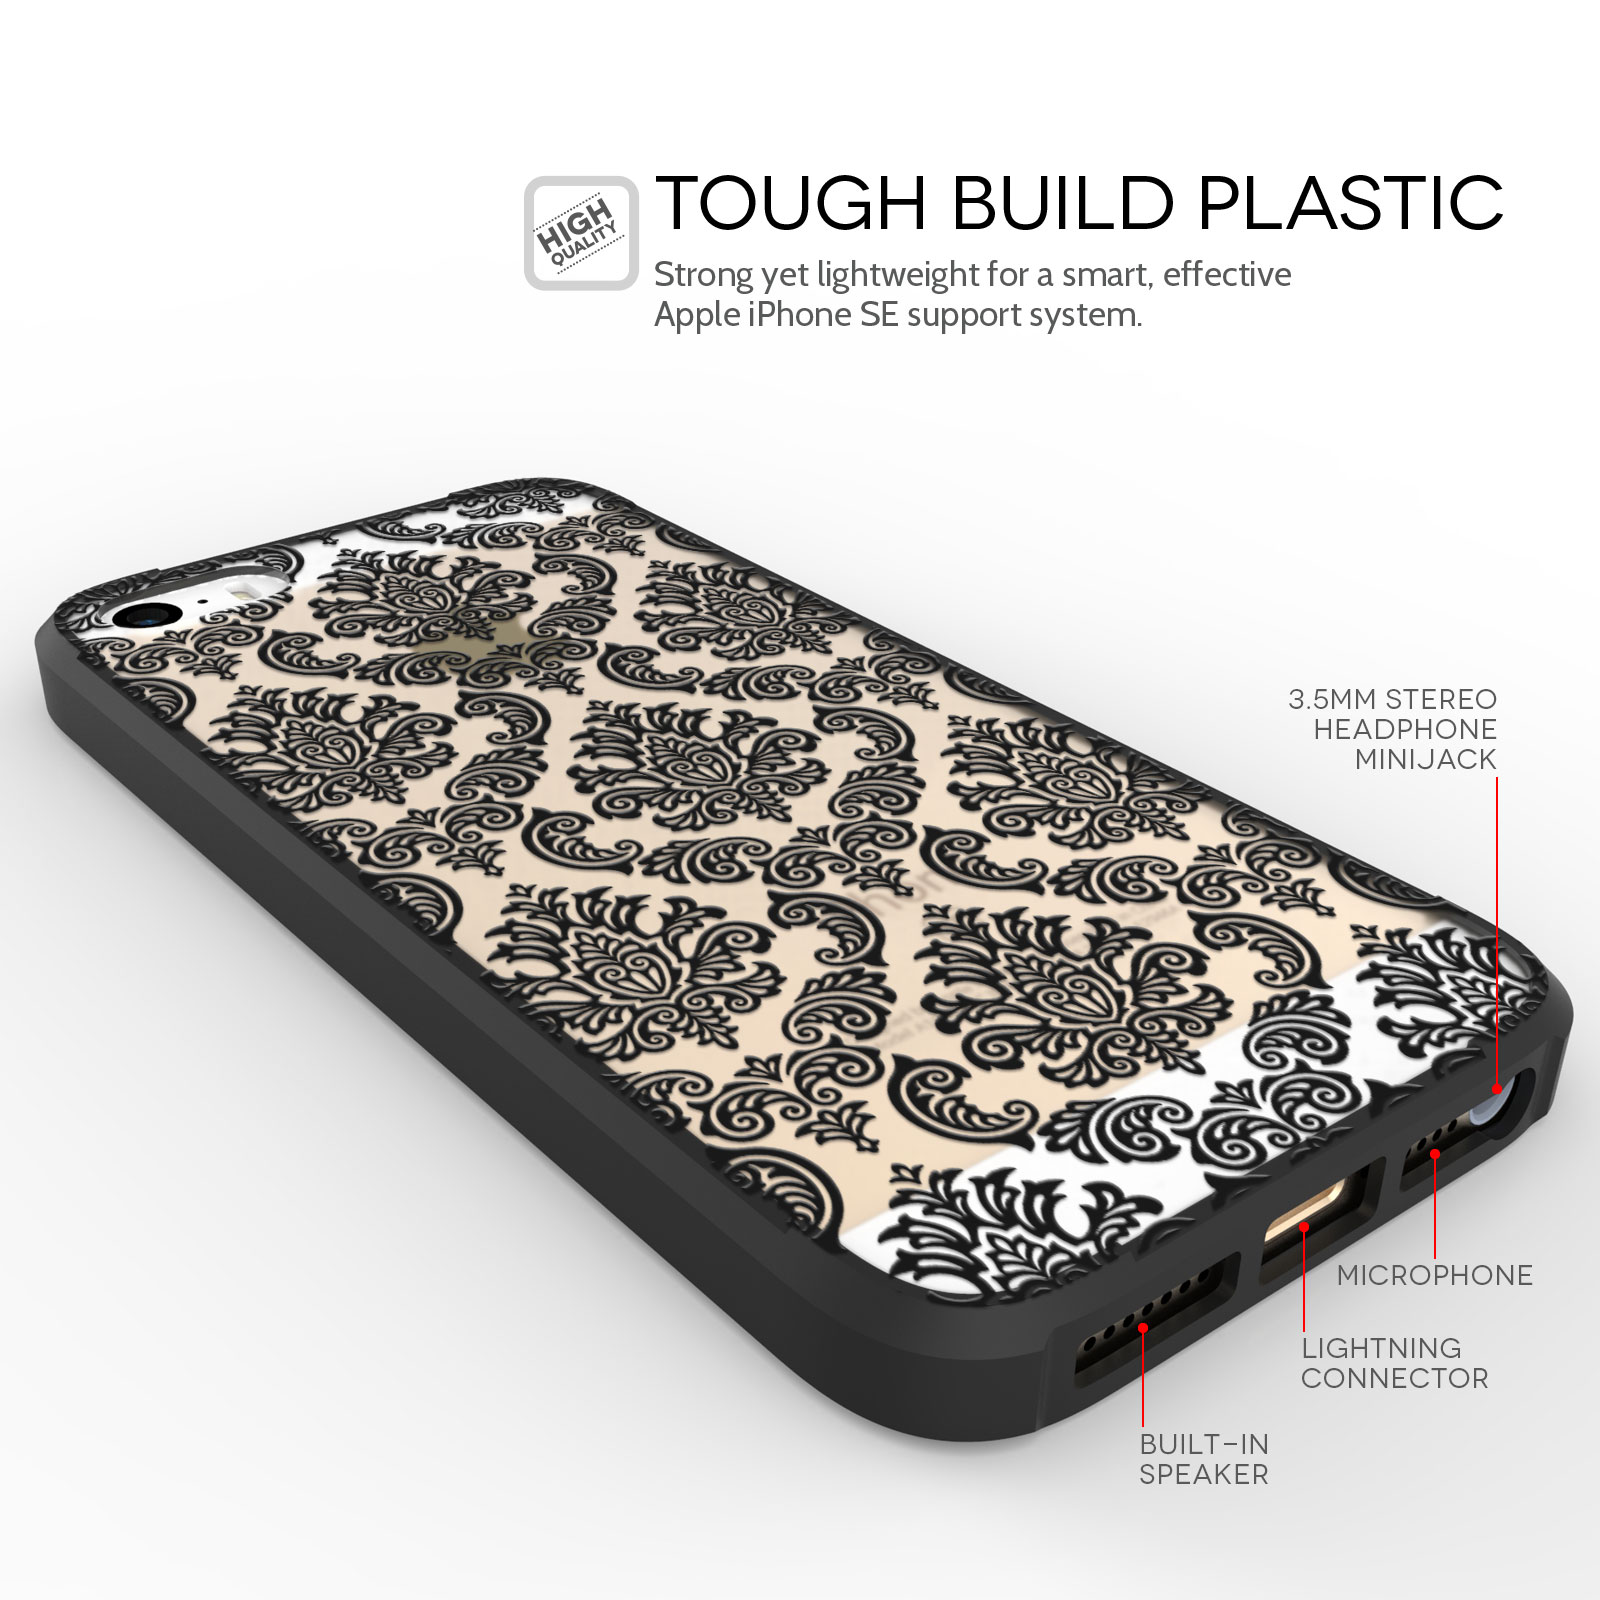 Yousave Accessories iPhone 5 and SE TPU Patterned Hard Case - Damask Black